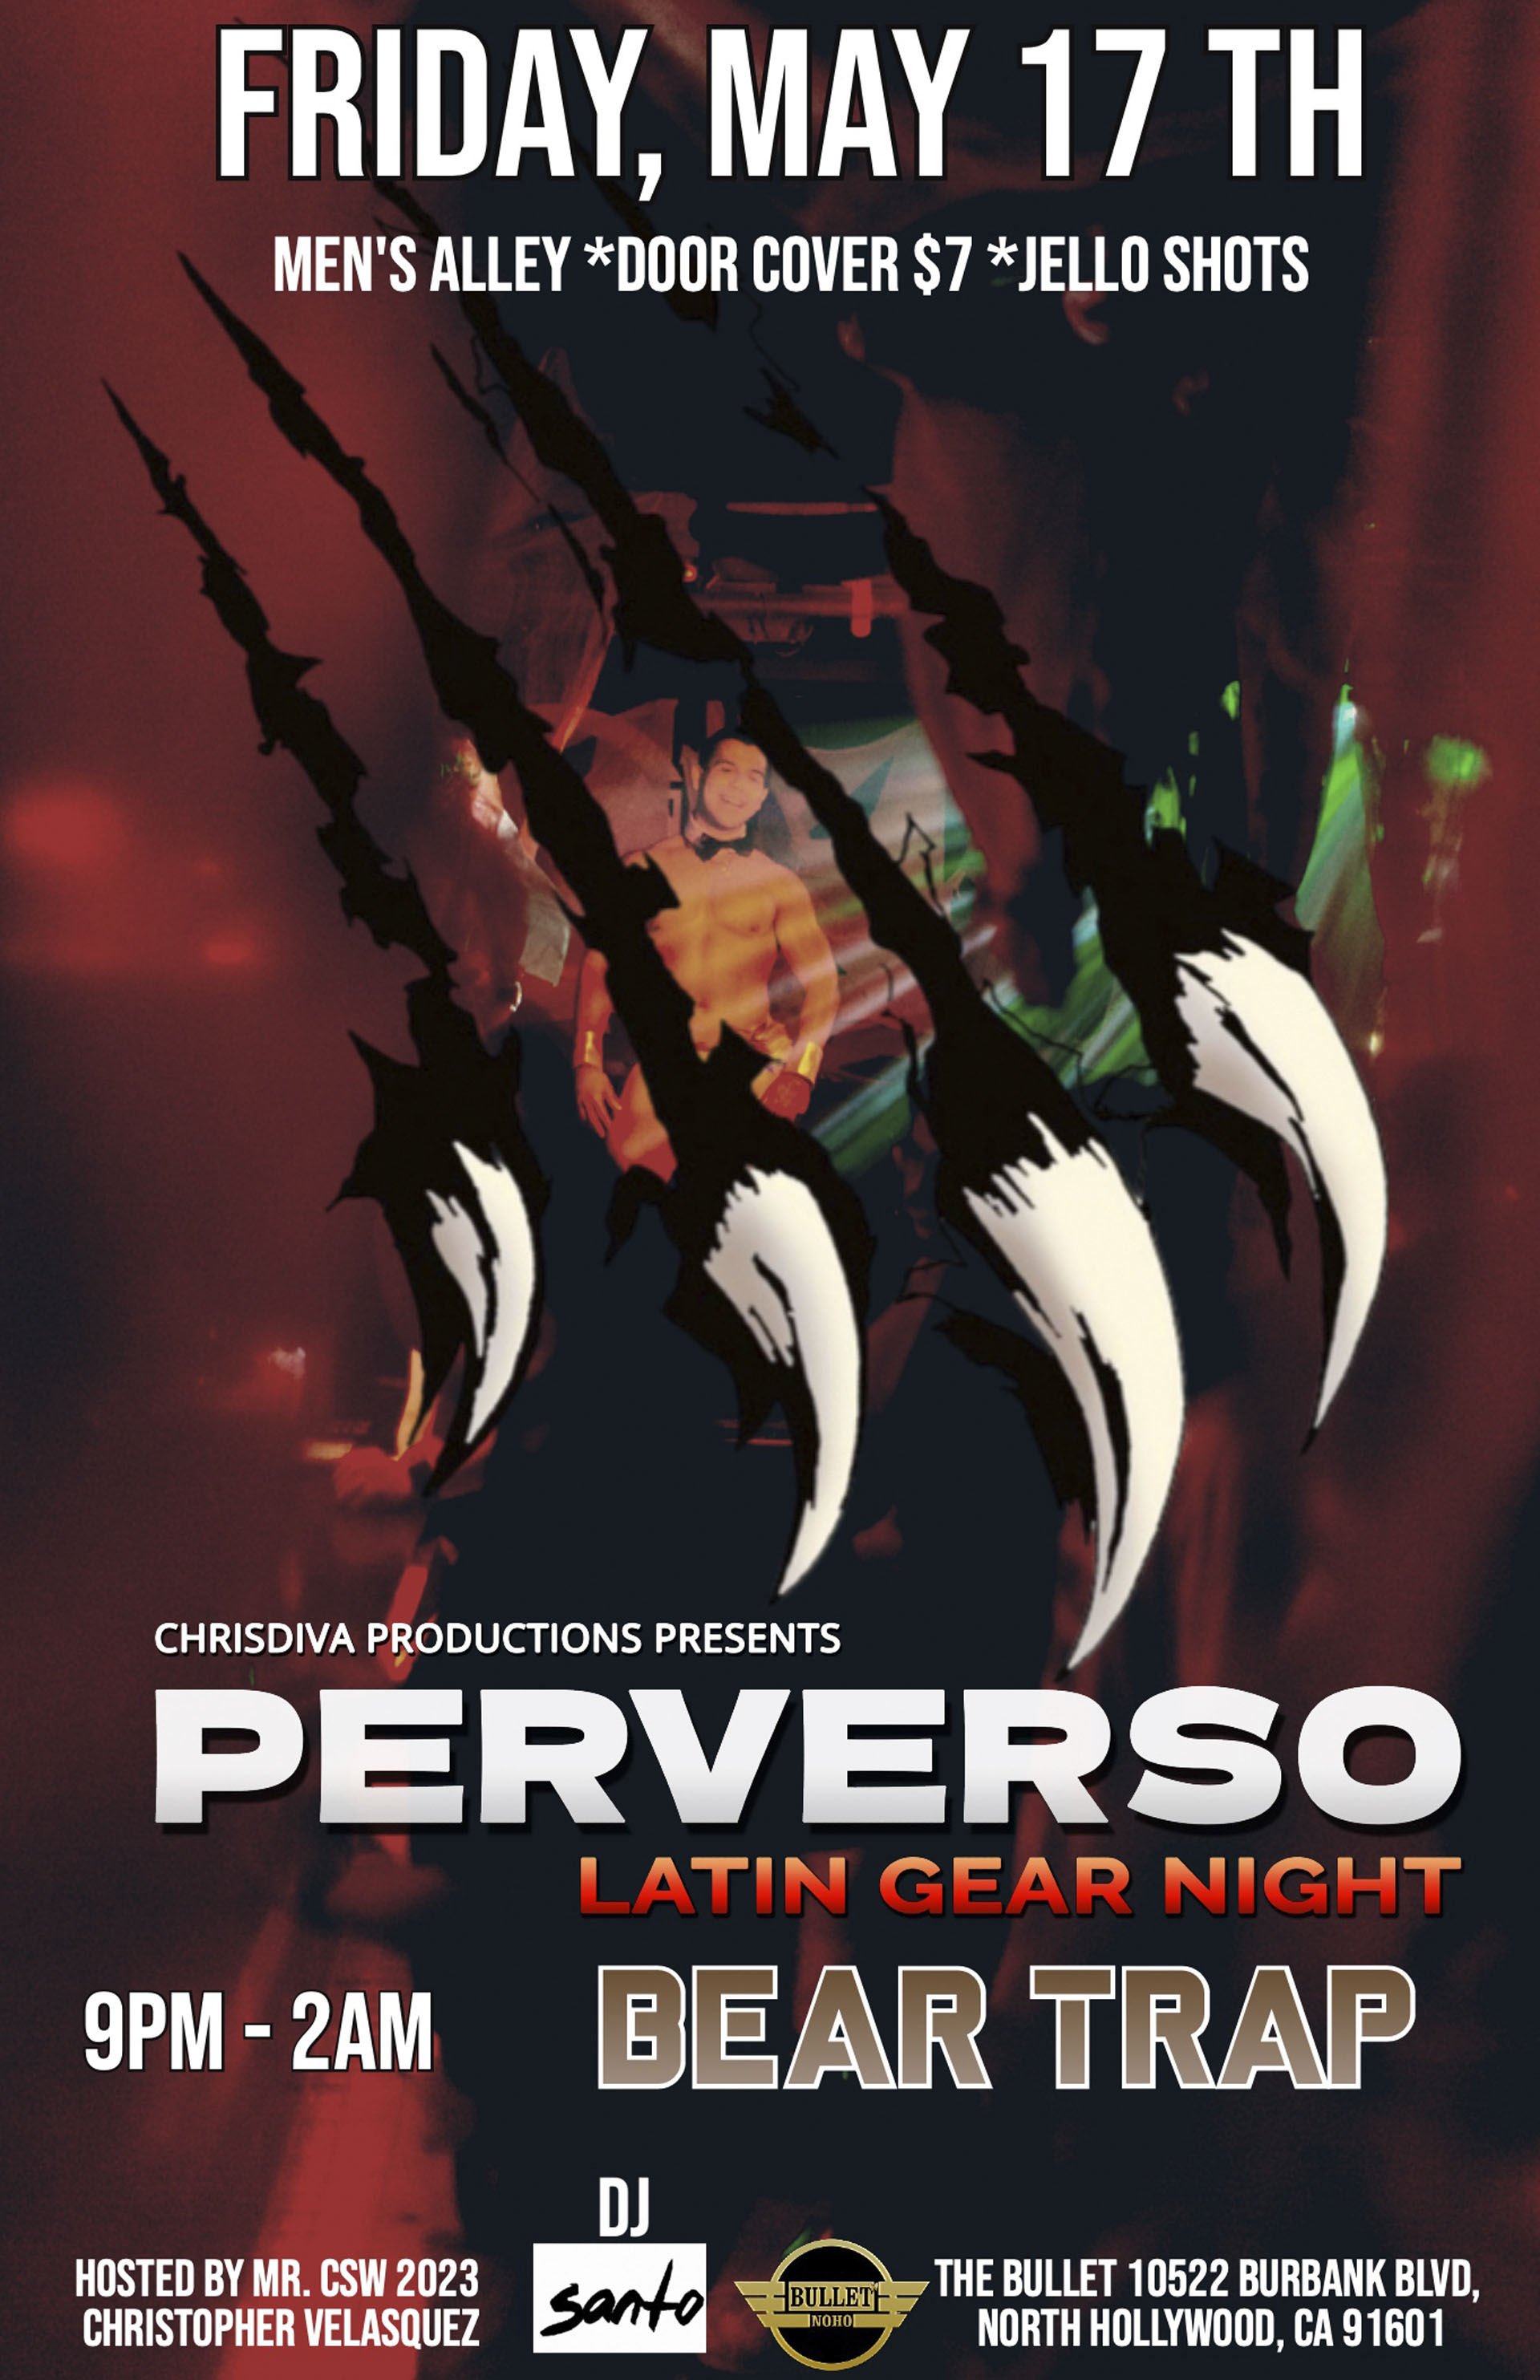 The Bullet Bar and ChrisDiva Productions Present: PERVERSO--Latin Gear Night BEAR TRAP Hosted by Mr. CSW Leather CSW Chris Velasquez! Friday, 05/17/24 at 9PM. GoGos, Men's Alley, JELL-O Shots. $7 Cover.